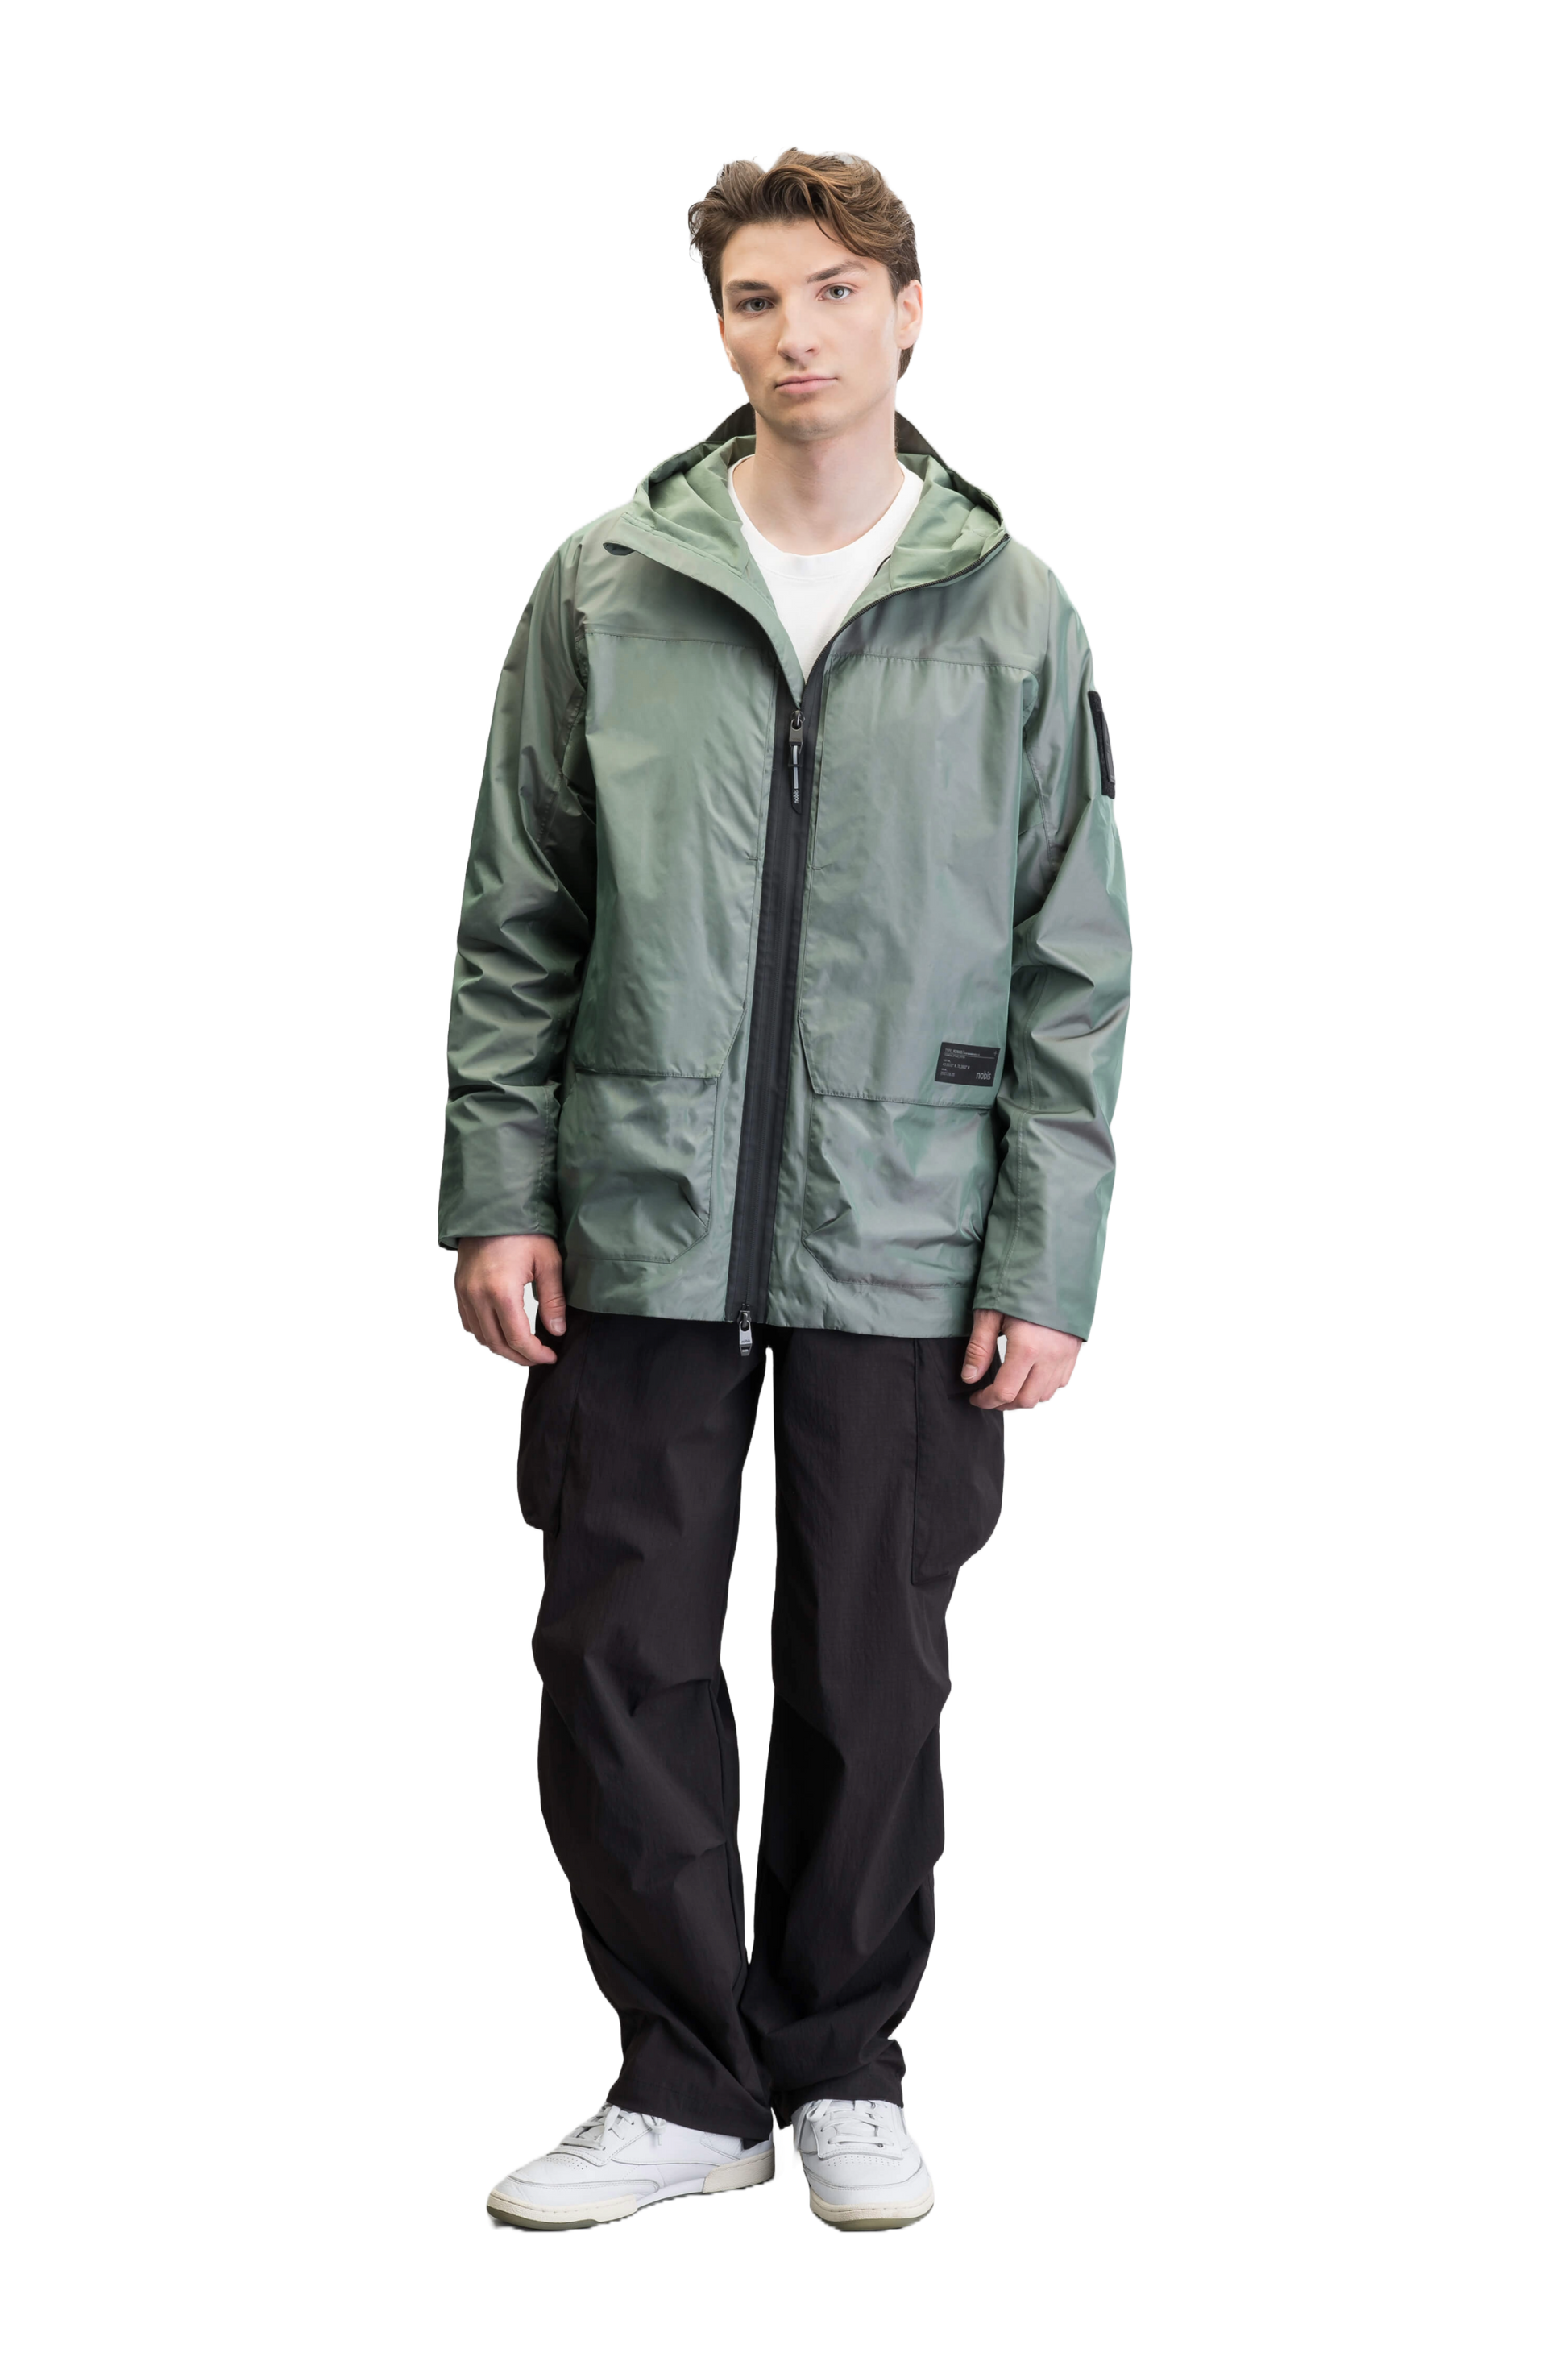 Mission Men's Performance Rain Shell Jacket in hip length, non-removable hood with adjustable toggle, two-way waterproof zipper, flap closure waist pockets with additional side entry storage, zipper ventilation on back, passive underarm ventilation, and breathable mesh lining, in Duck Green